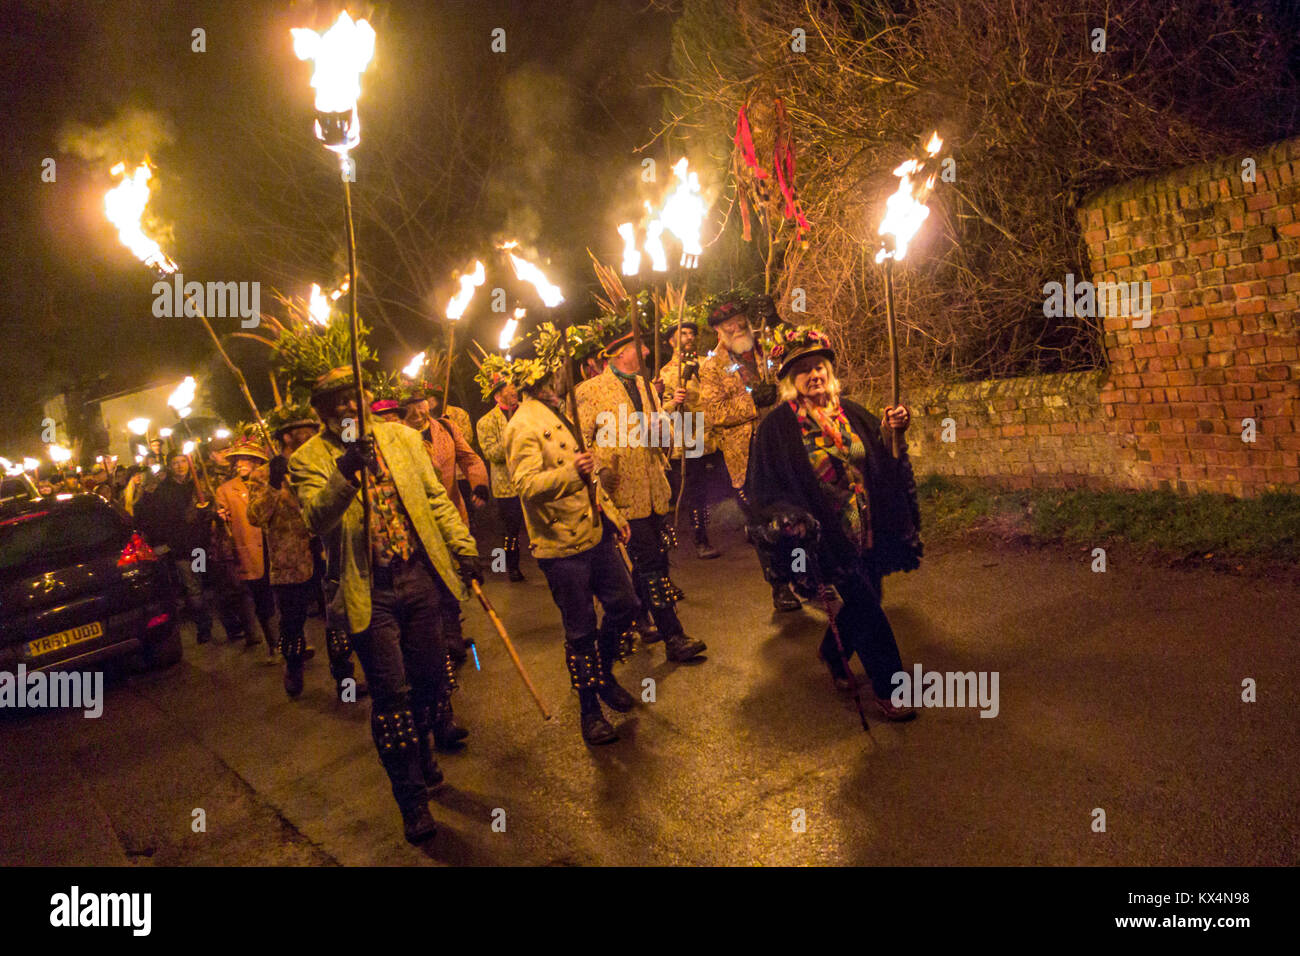 Dilwyn, Herefordshre, UK. 6th Jan, 2018. Members of the Leominster Morris seen walking through the street with crowds at the Crown Inn before heading to the apple orchard of Mr Richard Wellings to take part in a torchlit Cider wassailing ceremony ahead of Twelfth Night. Credit: ZUMA Press, Inc./Alamy Live News Stock Photo